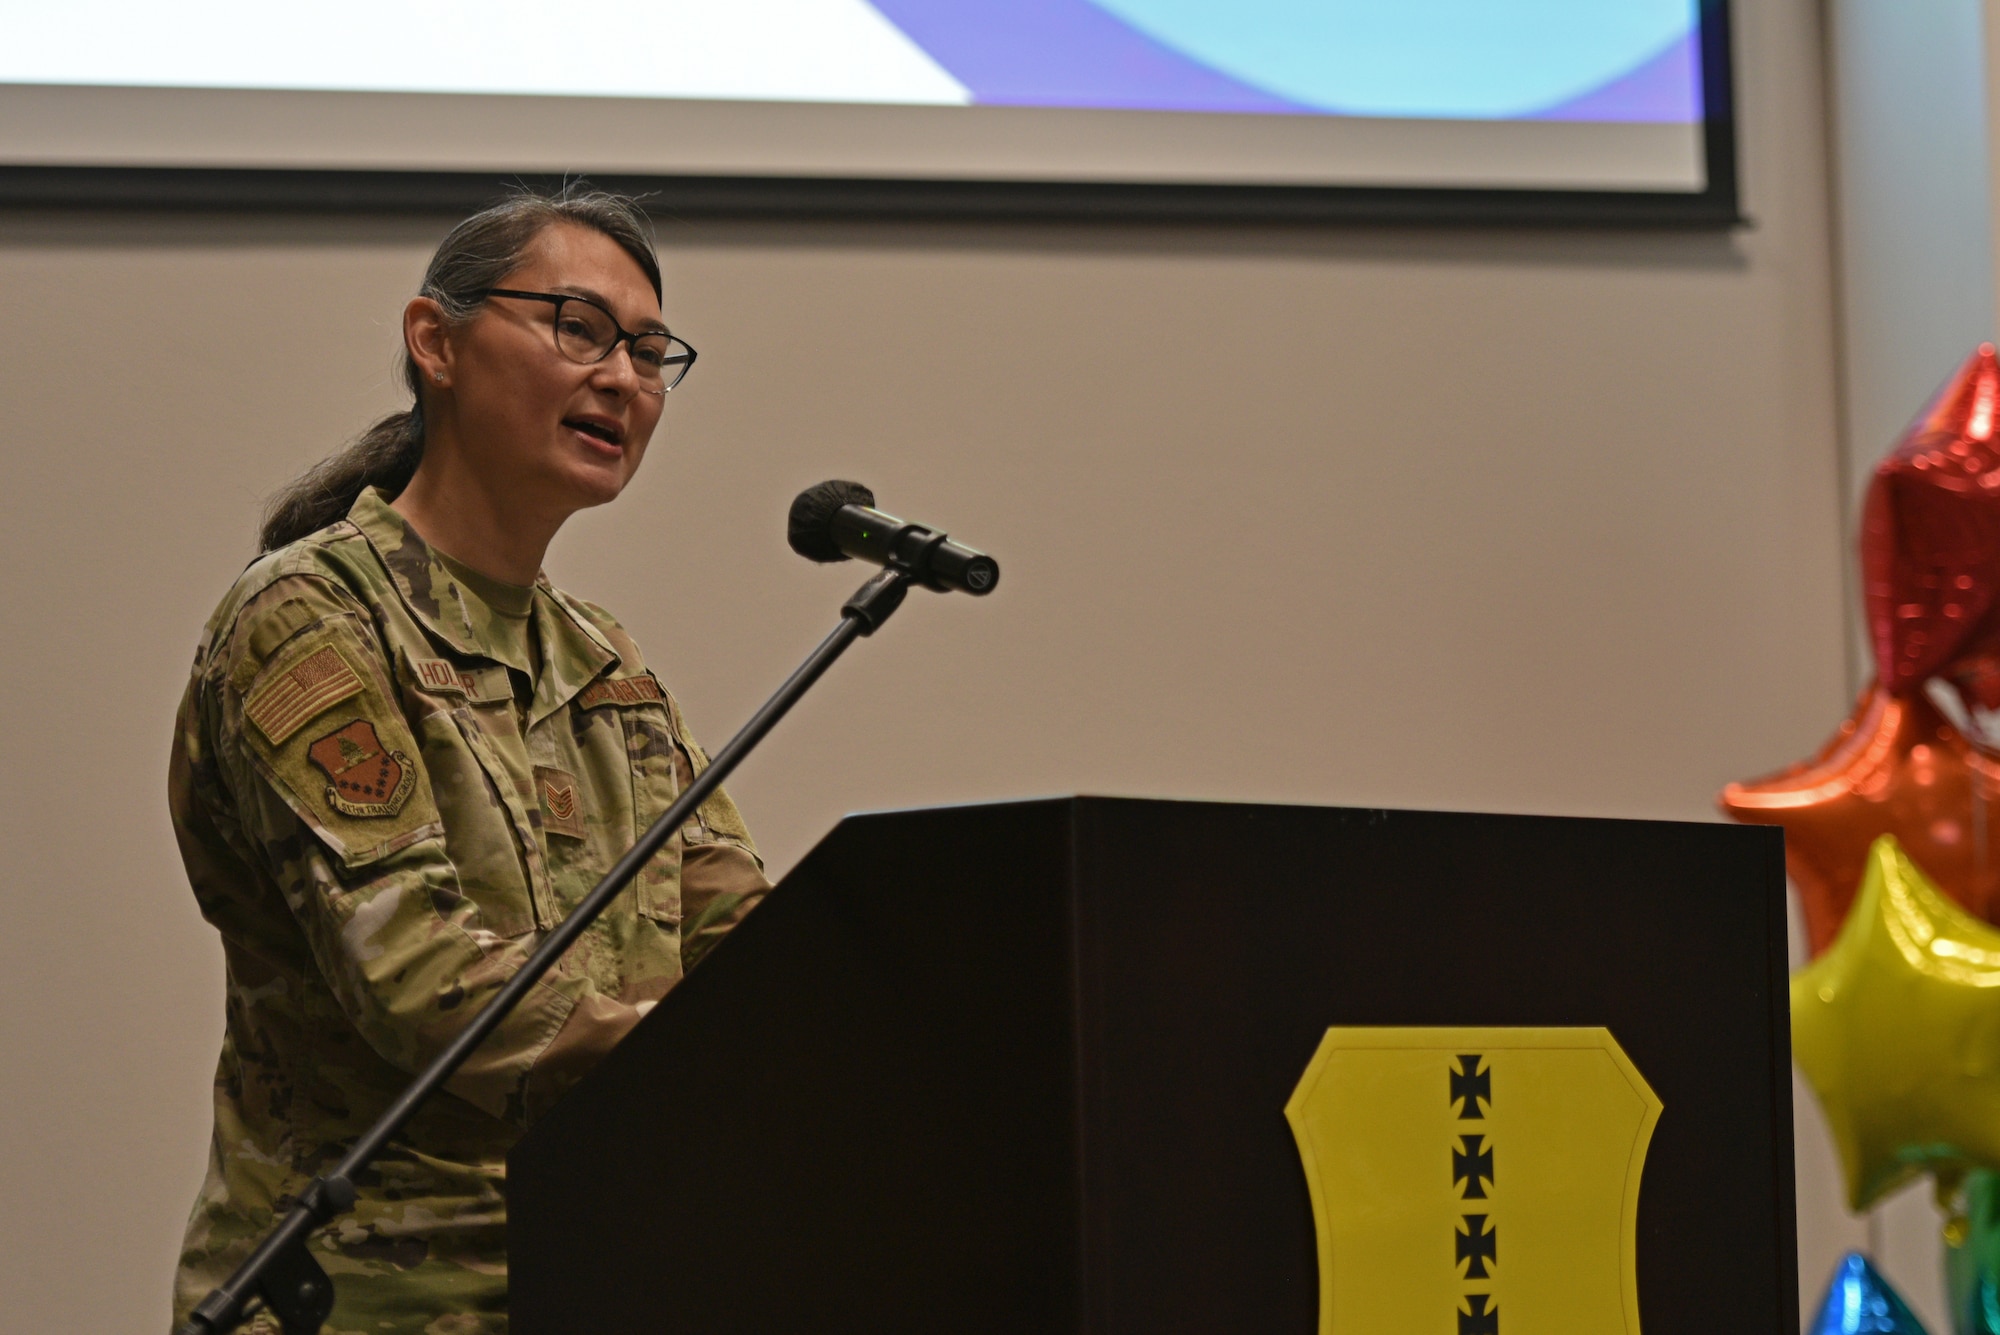 U.S. Air Force Tech. Sgt. Alexandria Holder, 517th Training Group global language mentor, speaks at the Pride Month Kickoff and Leadership Panel, Goodfellow Air Force Base, Texas, June 6, 2022. Holder spoke about her own personal journey as a transgender female serving in the military and how the ‘Don’t Ask, Don’t Tell’ ban affected her. (U.S. Air Force photo by Senior Airman Ashley Thrash)